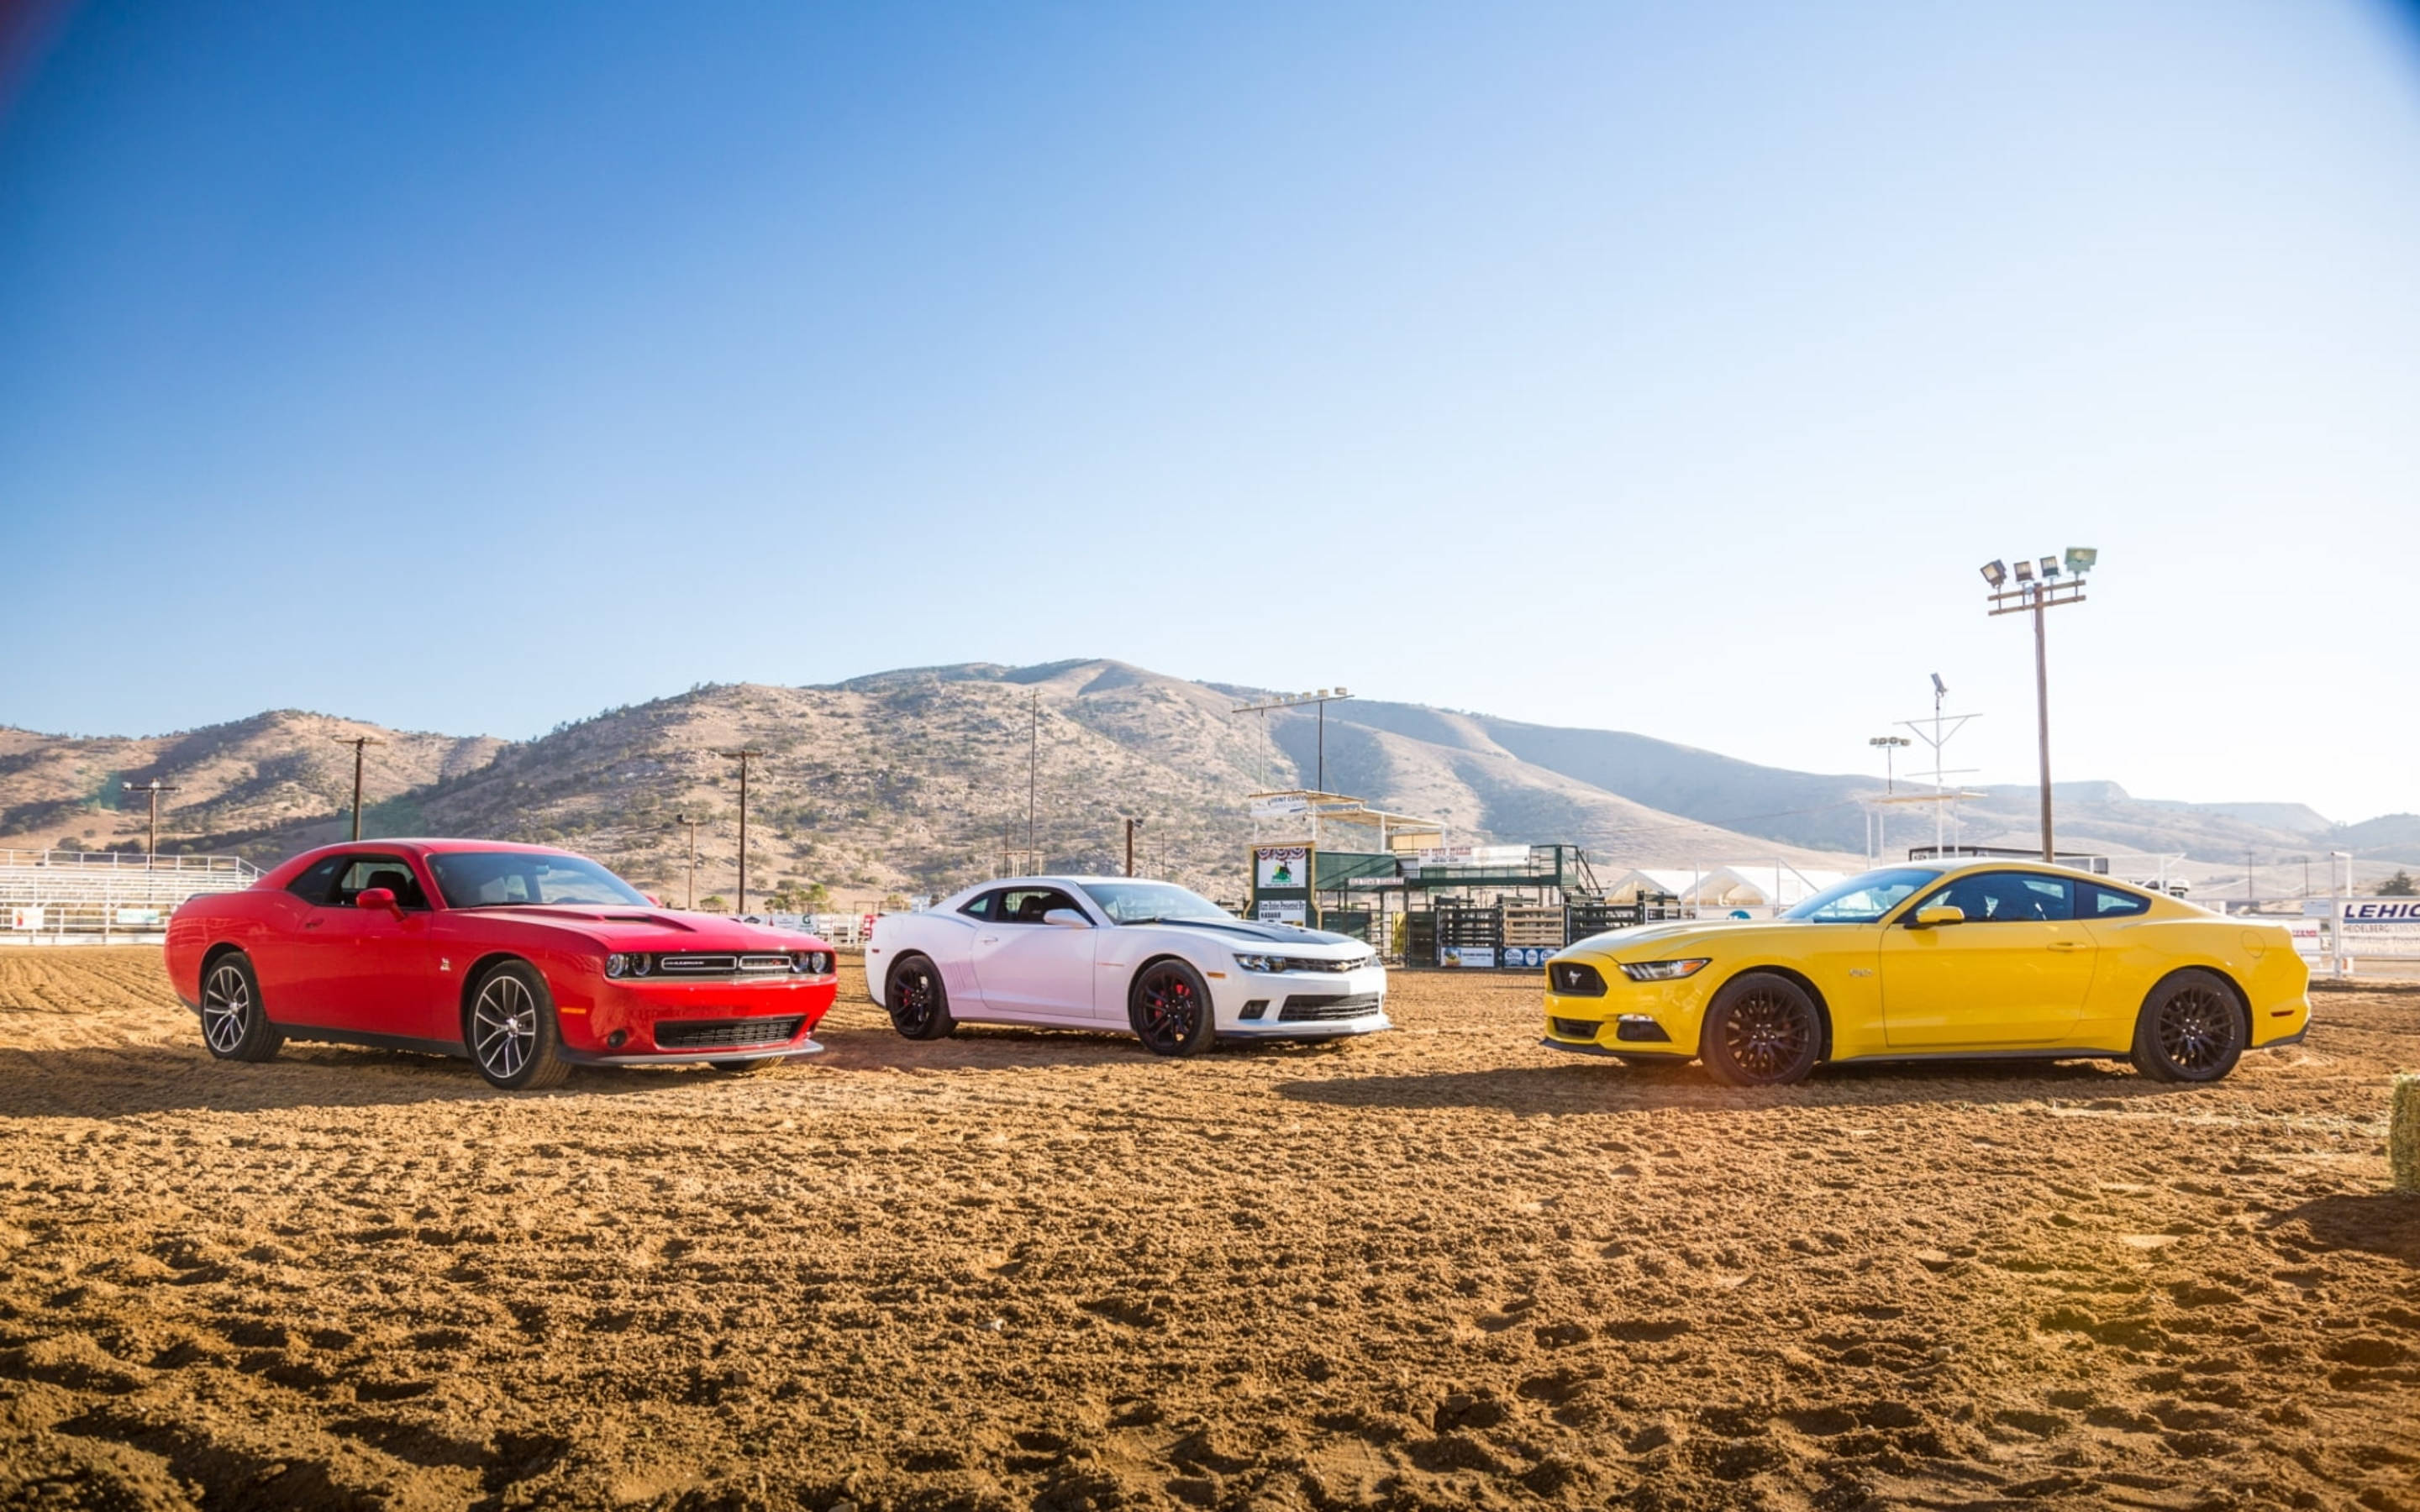 Camaro Muscle Cars In The Outback Wallpaper